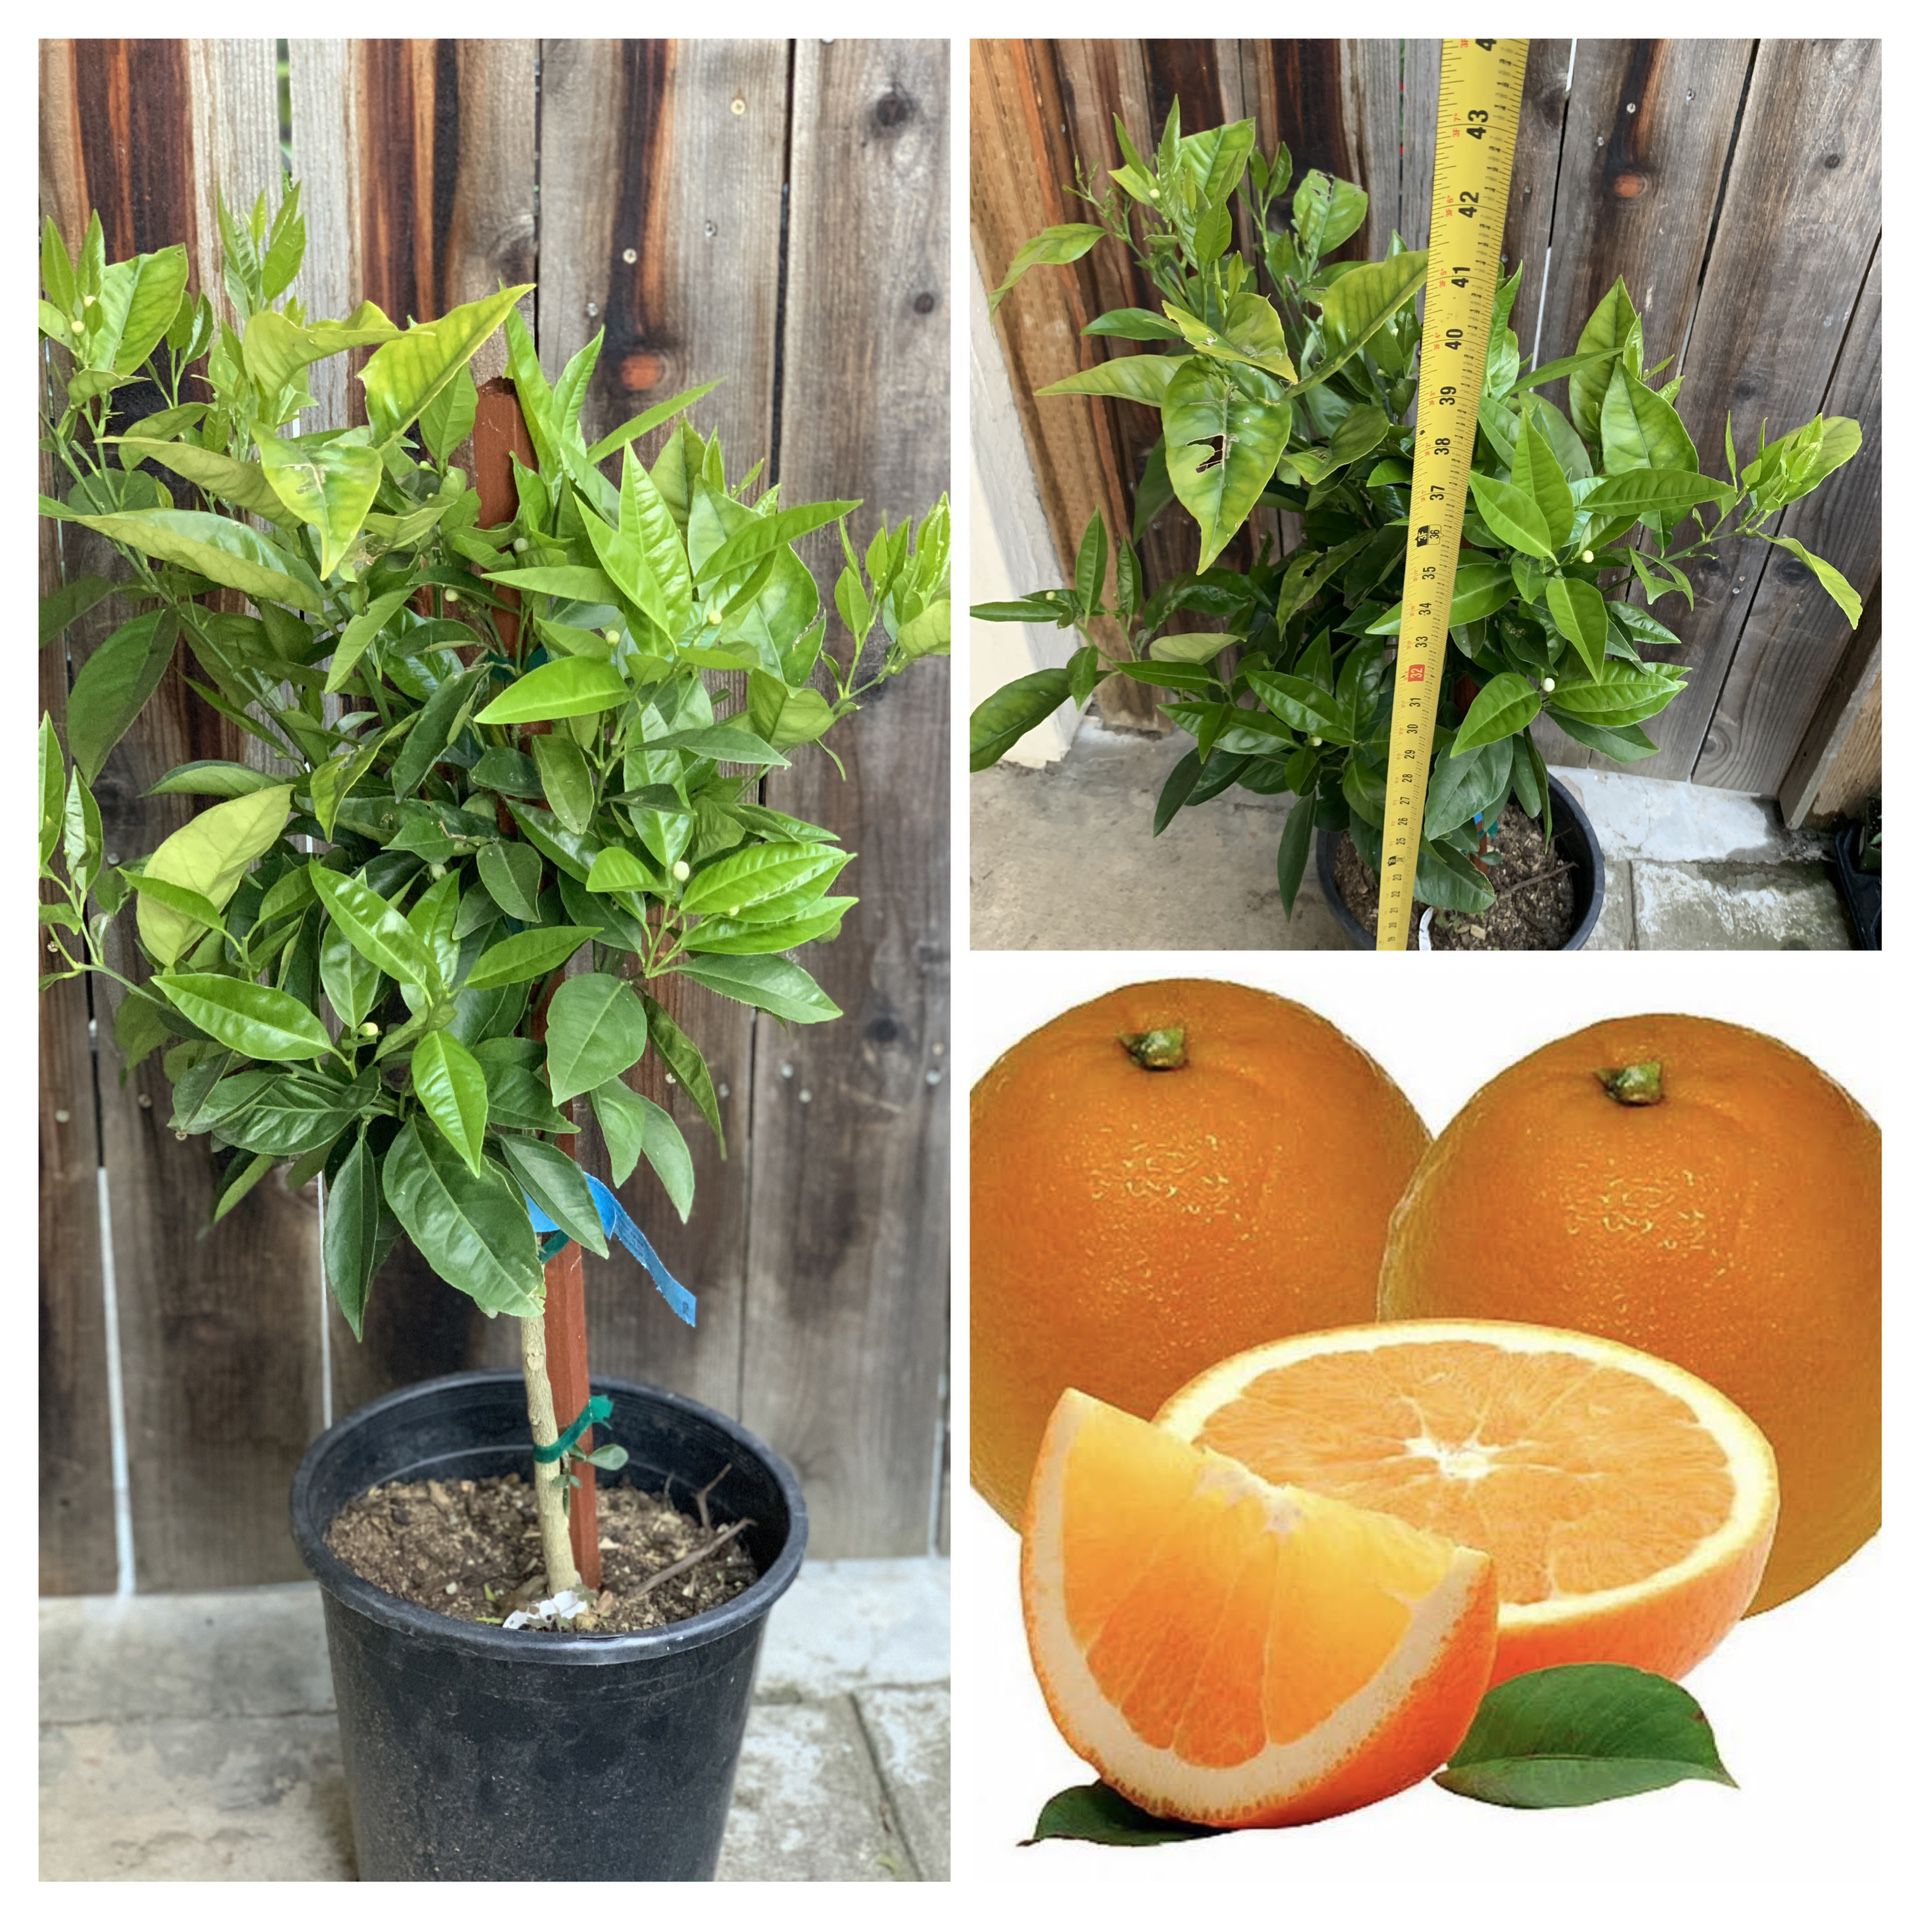 BLOOMING FLOWERING BUSHY MIDNIGHT VALENCIA GRAFTED CITRUS ORANGE FRUIT TREE LIVE PLANT IN 5 GALLON POT  CASH ONLY  PICK UP IN NORTH SAN JOSE 